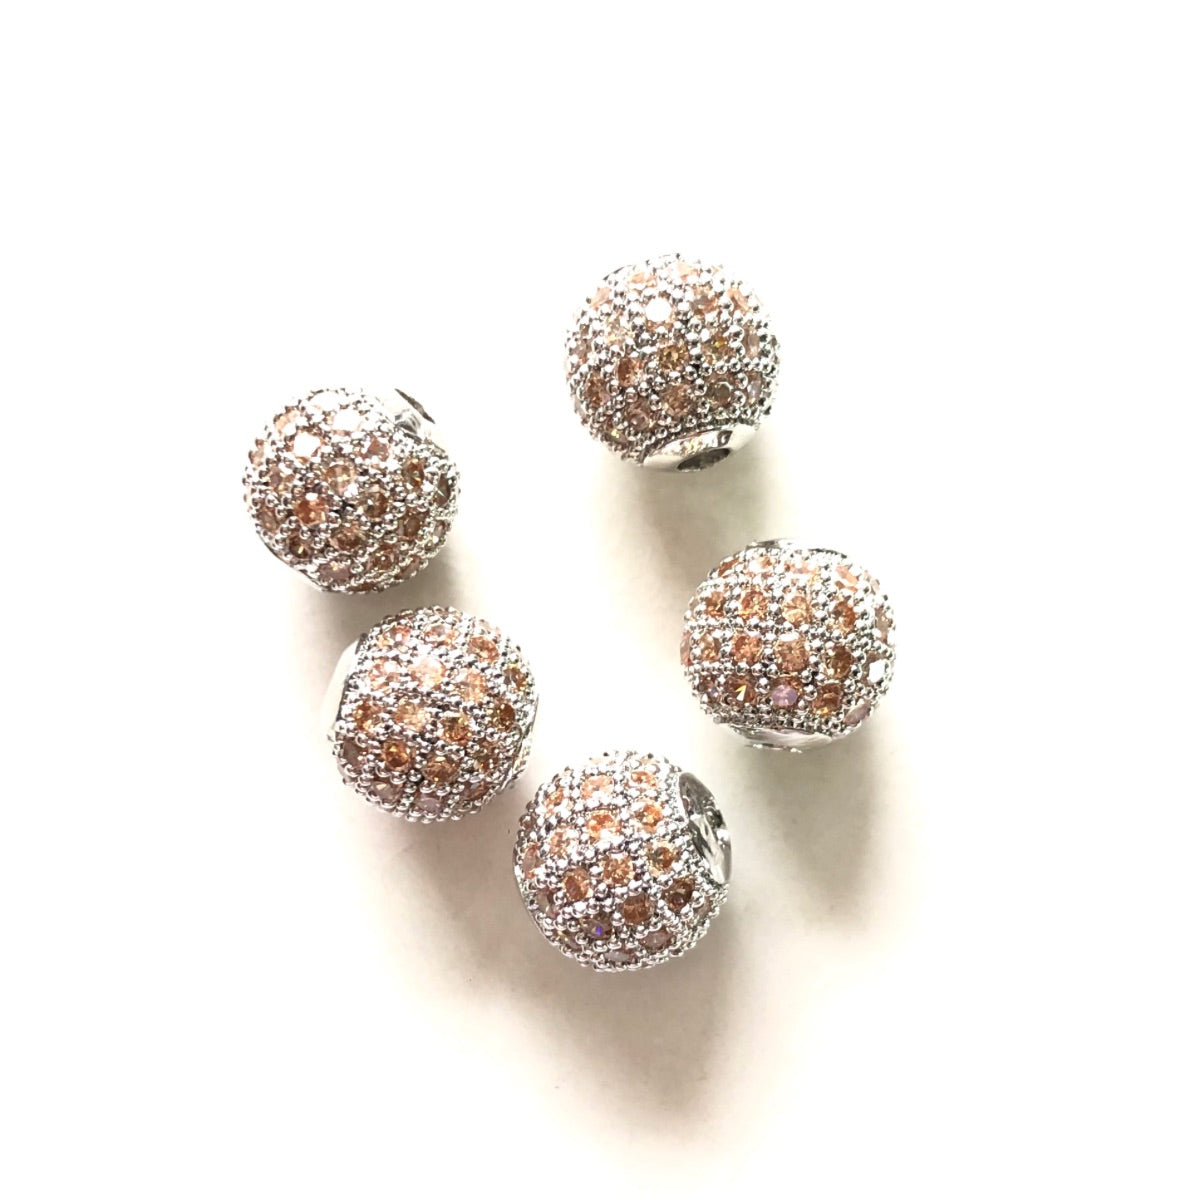 10pcs/lot 6mm, 8mm Colorful CZ Paved Ball Spacers Silver Champange CZ Paved Spacers 6mm Beads 8mm Beads Ball Beads Colorful Zirconia New Spacers Arrivals Charms Beads Beyond